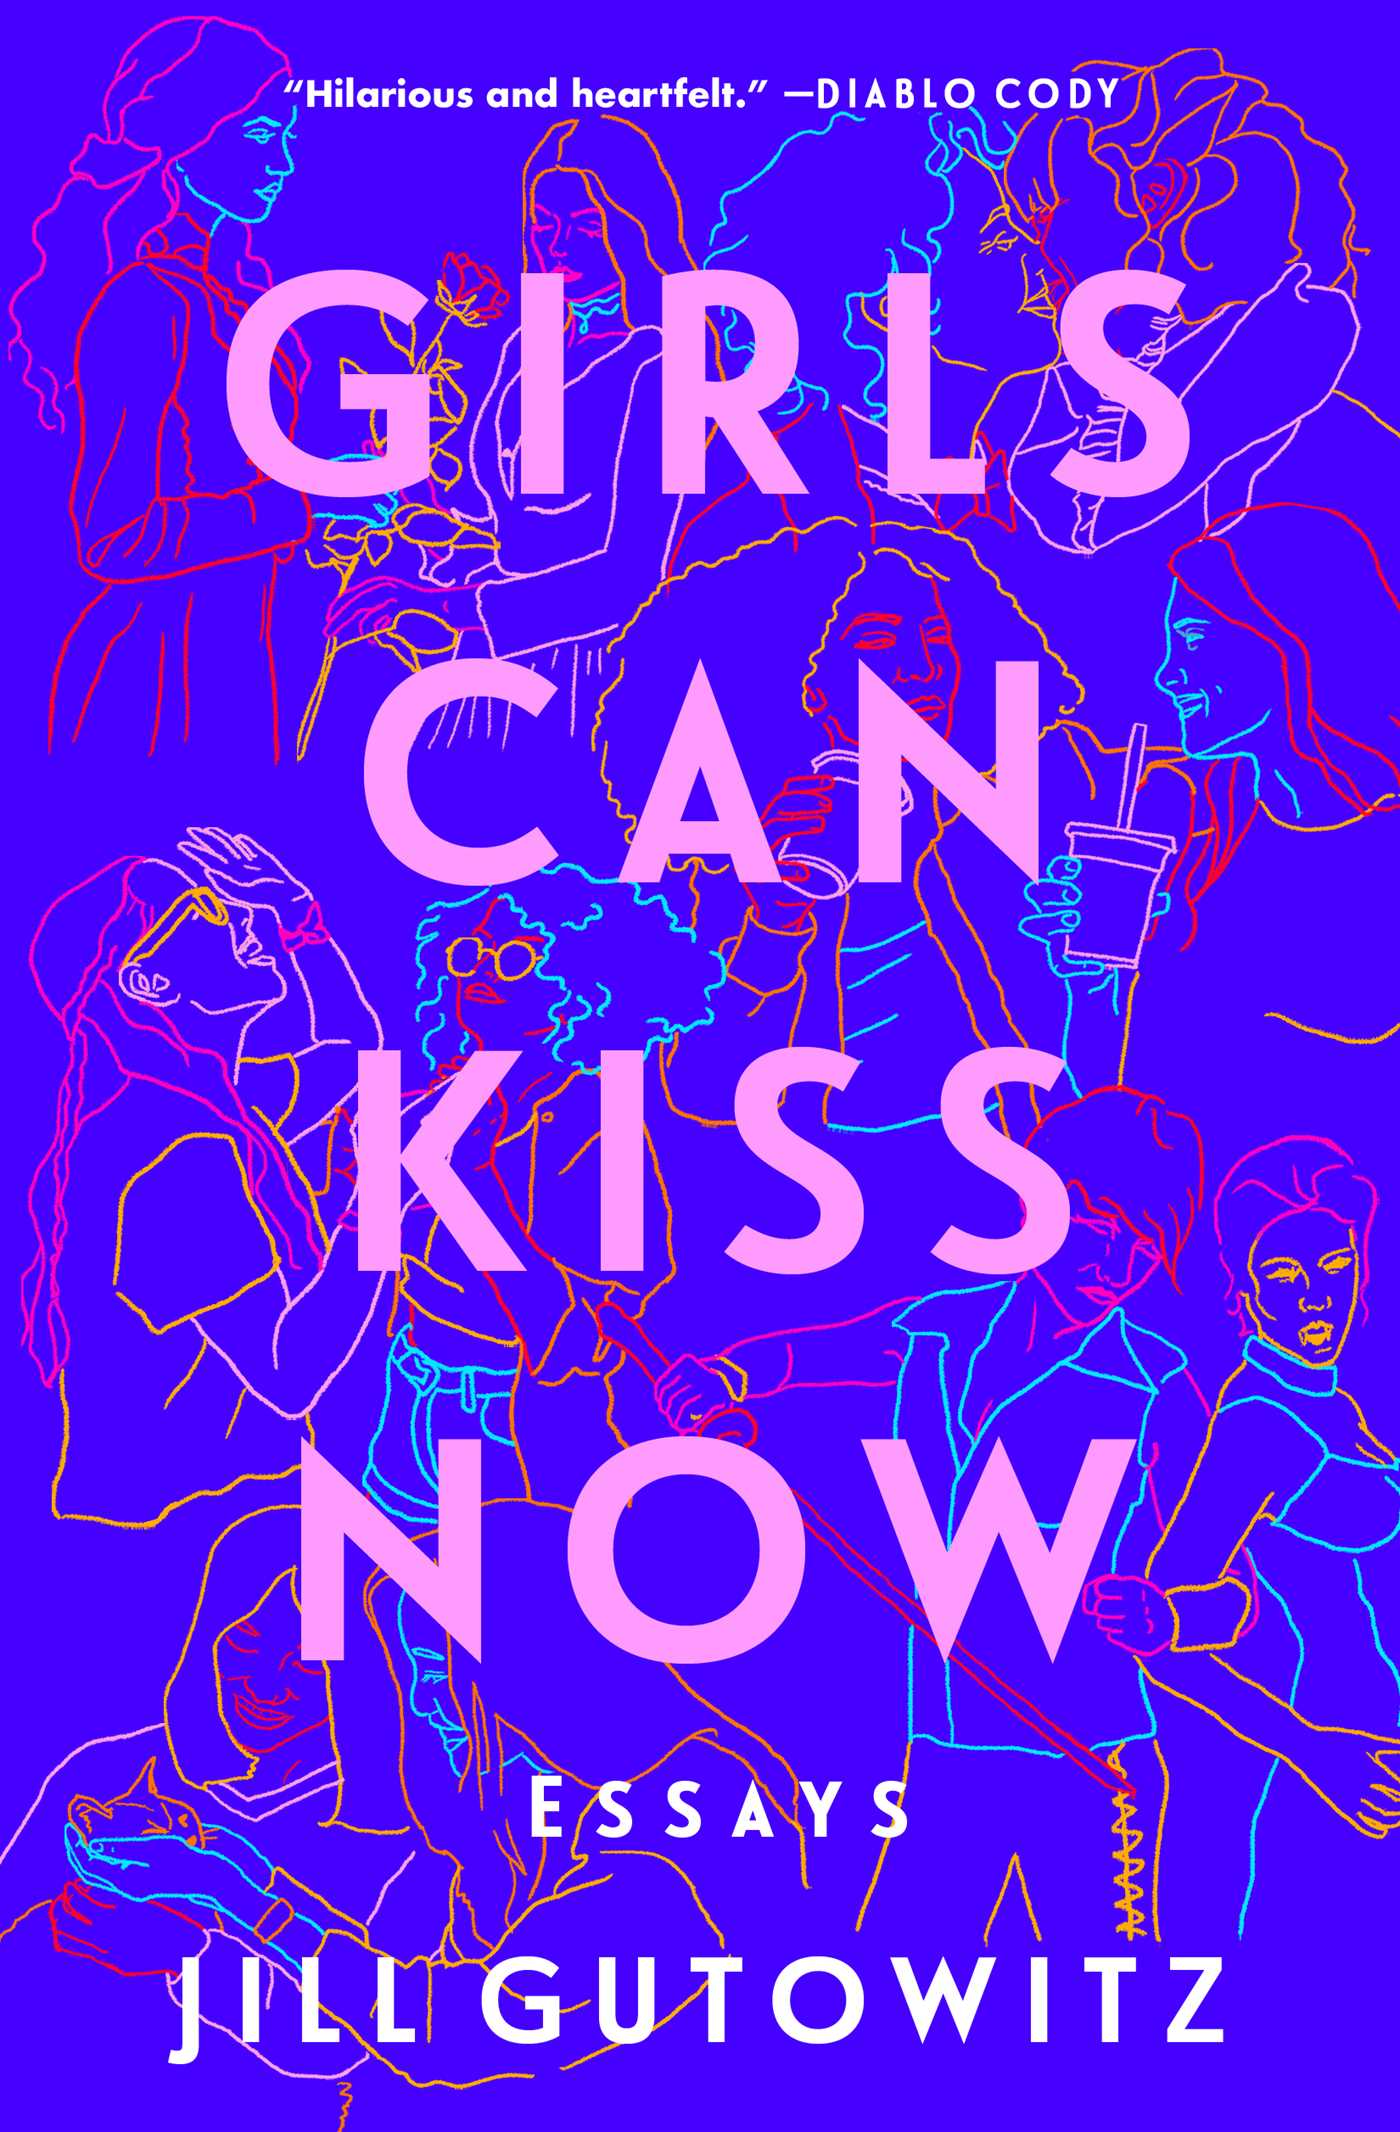 "Girls Can Kiss Now; Essays by Jill Gutowitz" — Image is blue background with stylized drawings of girls interacting in various ways (petting a kitten, giving flowers, etc)